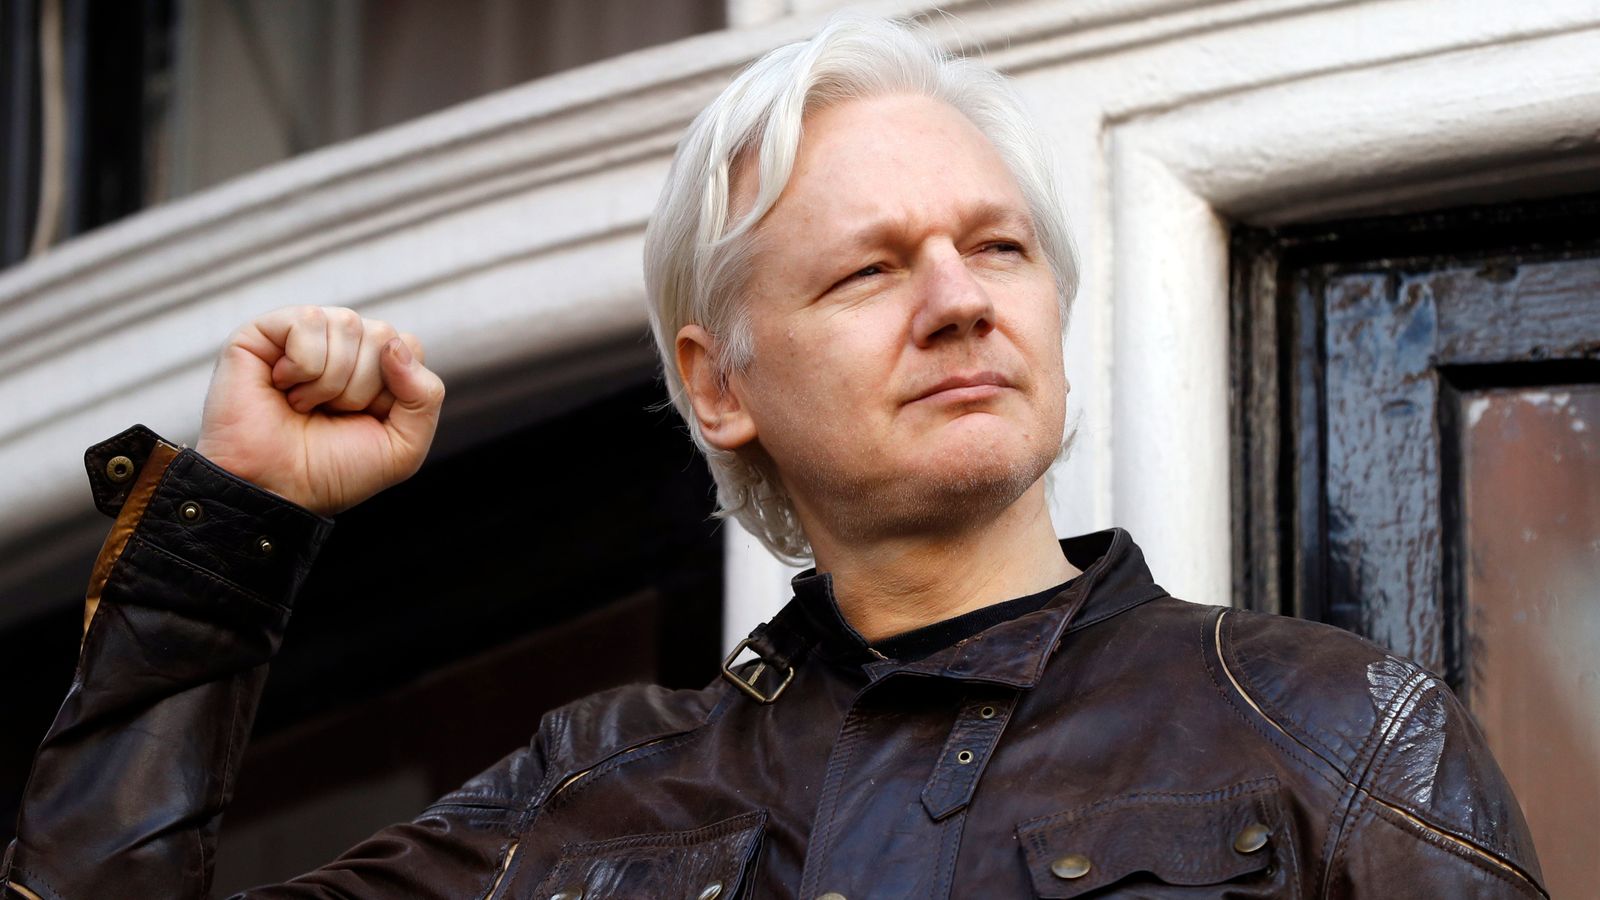 Julian Assange: Australian parliament calls for Wikileaks founder's release ahead of extradition appeal